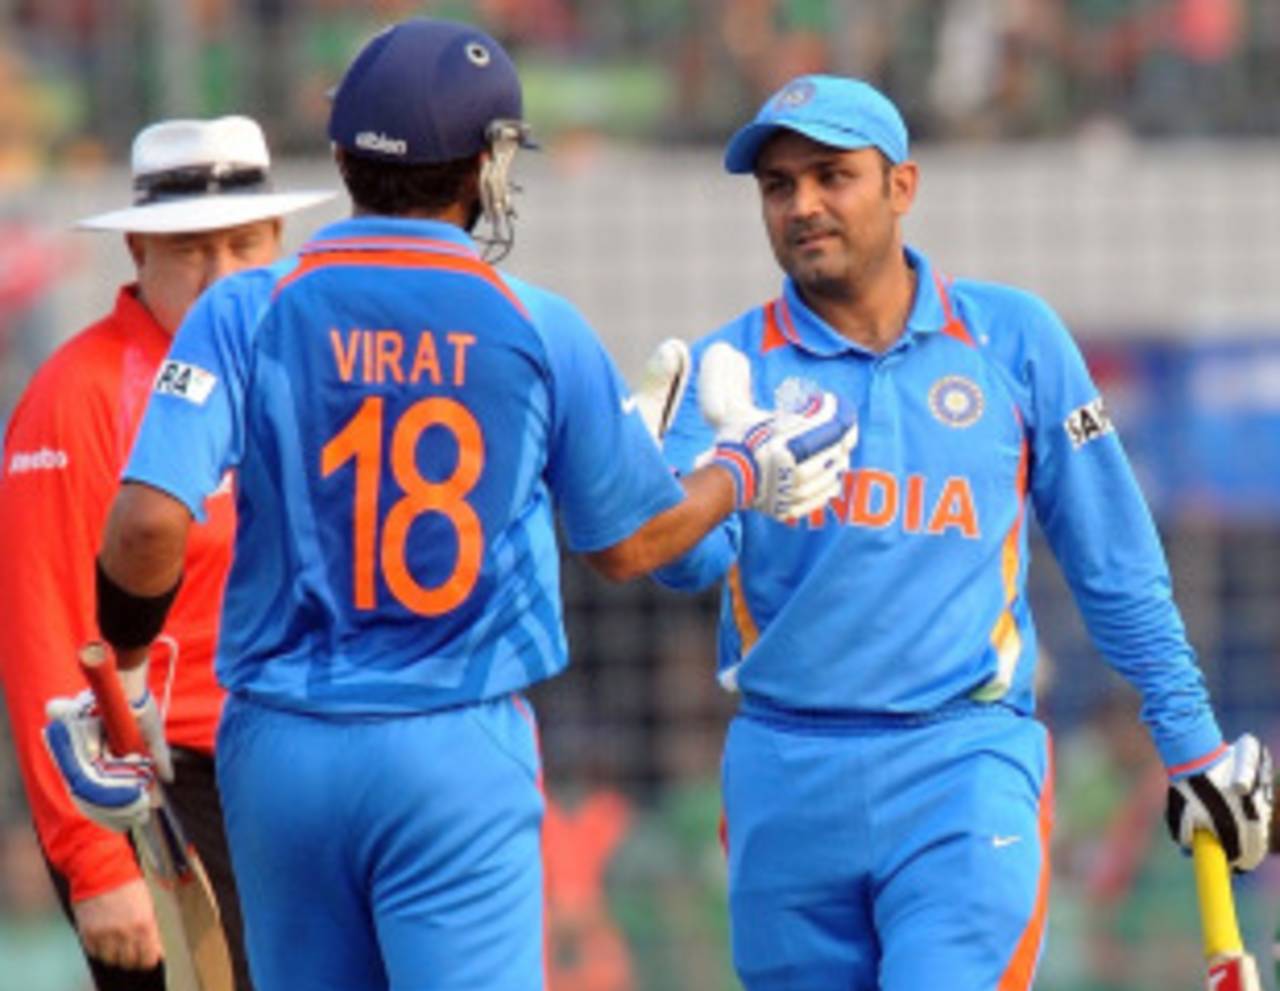 Virender Sehwag is congratulated by Virat Kohli after getting to a century off 94 balls, Bangladesh v India, Group B, World Cup 2011, Mirpur, February 19, 2011